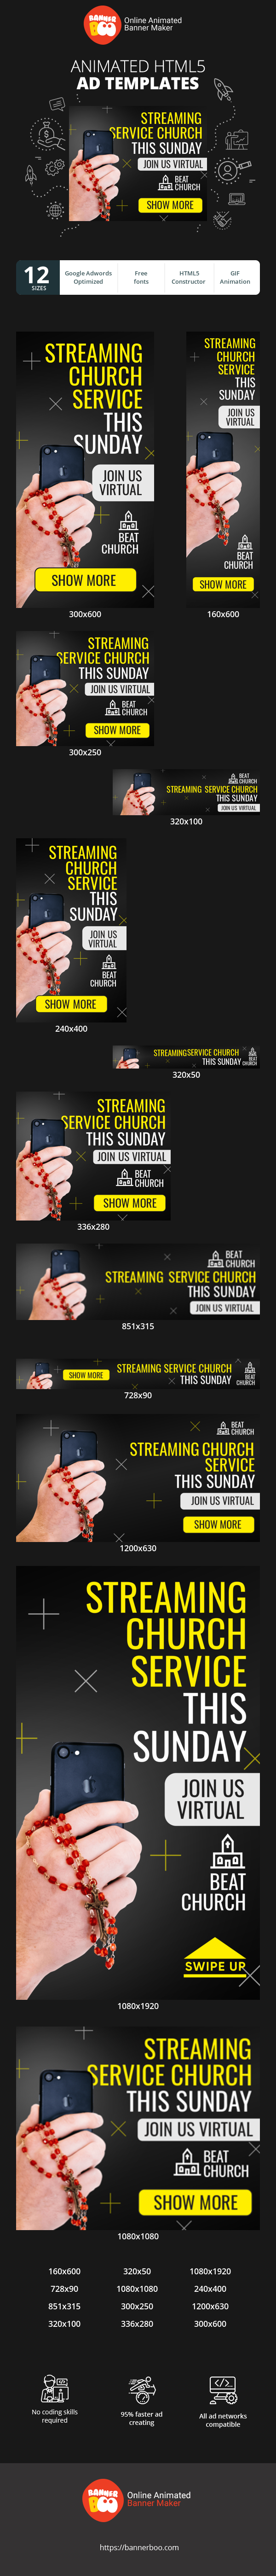 Banner ad template — Streaming Church Service This Sunday — Join Us Virtual